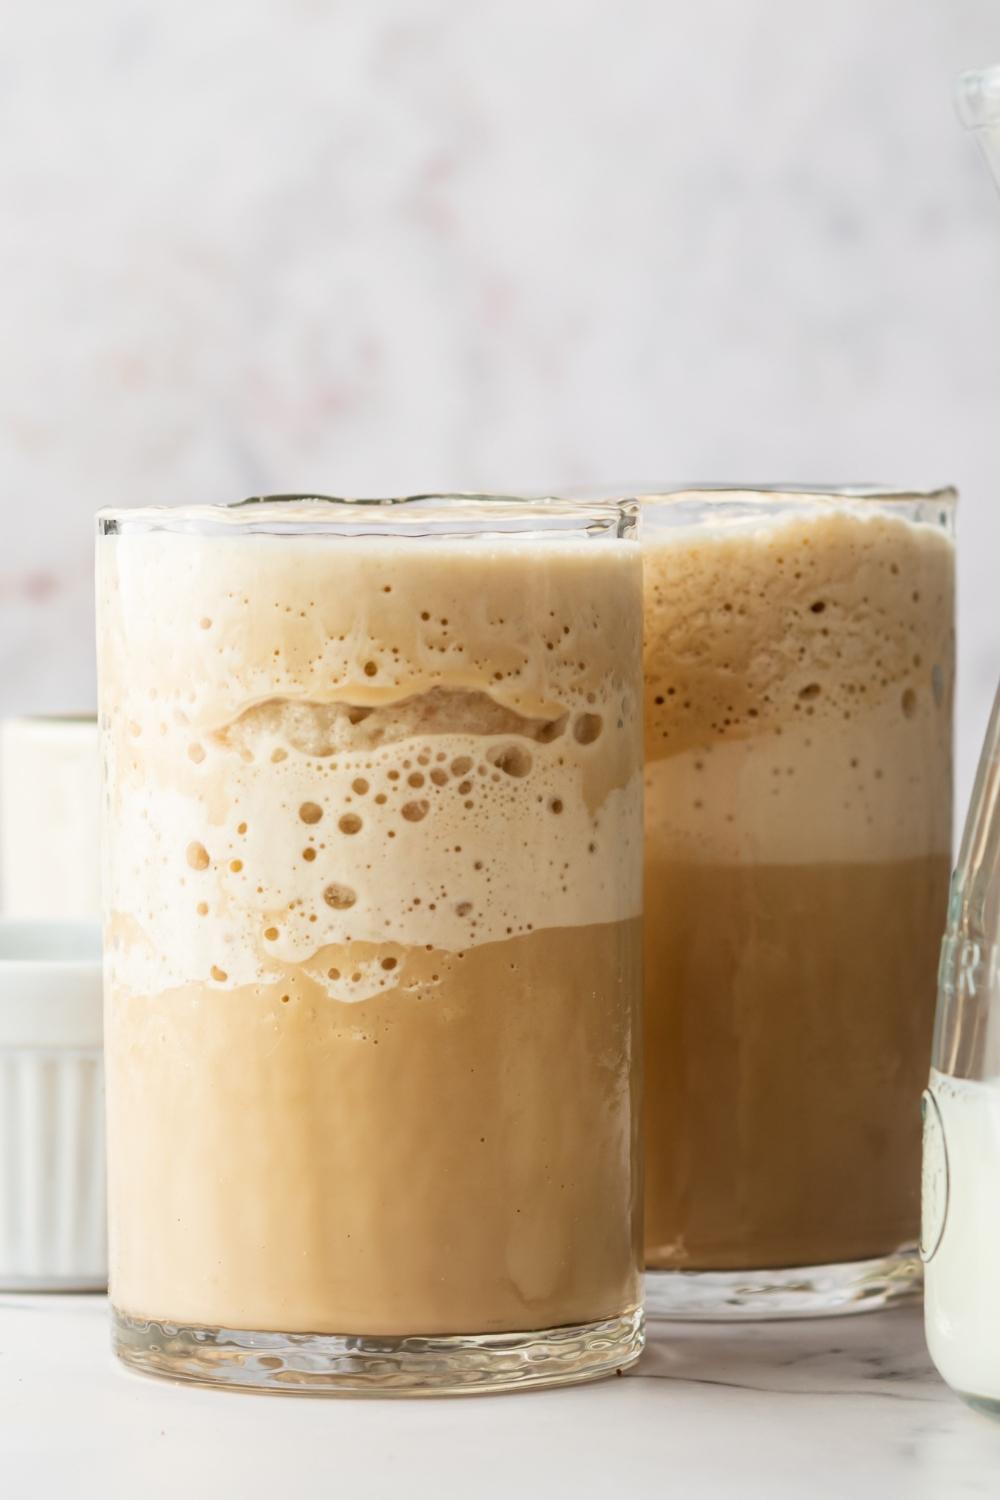 Two glasses on a countertop containing homemade McDonald's mocha frappe.